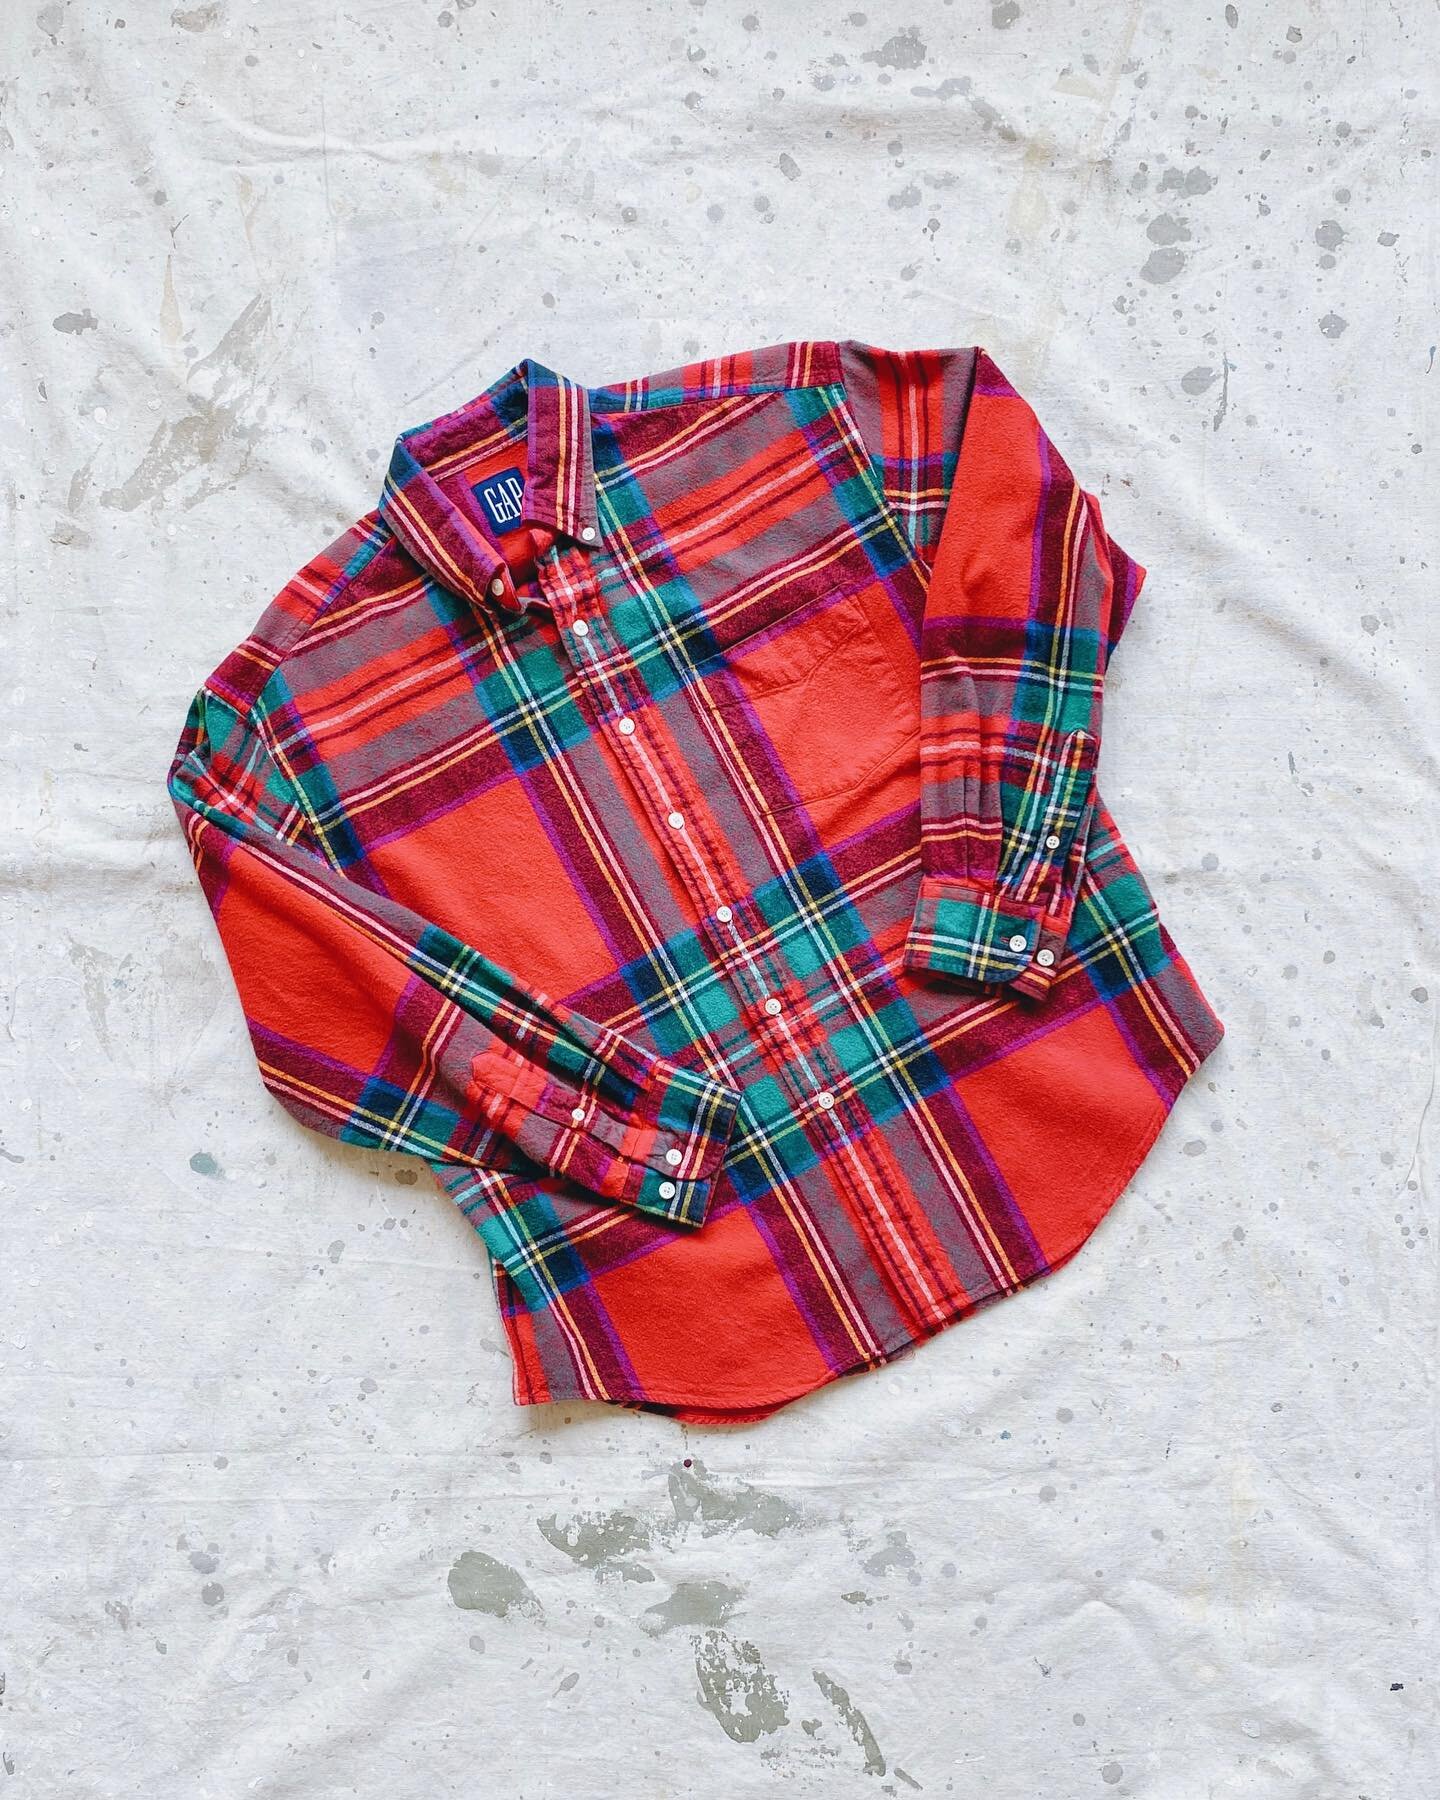 NOW AVAILABLE ✨✨ Vintage Gap Soft Red Plaid Flannel. Fits a modern size masc large, femme L/XL. Available for $46. DM to purchase or visit us during our open hours: wed-mon 11-6 #mothvintage_